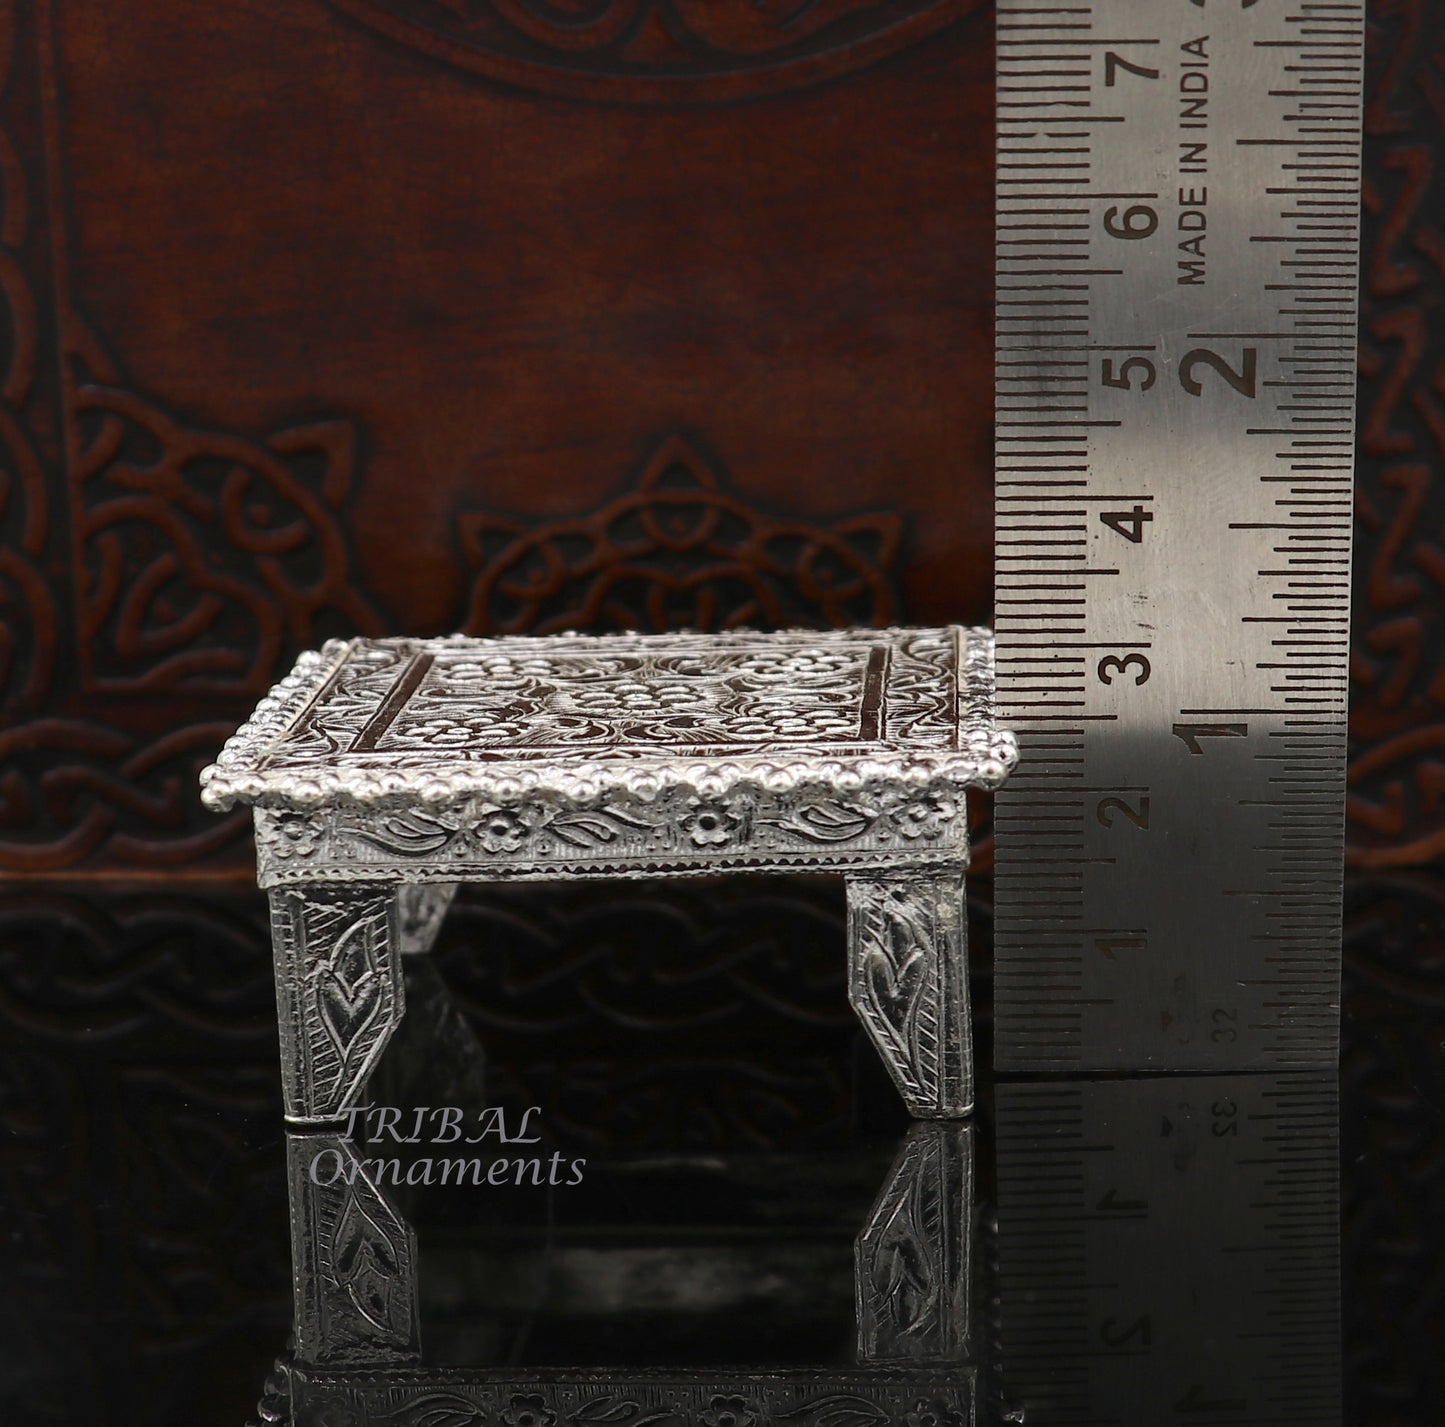 2" Vintage design Sterling silver handmade customize small square shape table/bazot/chouki, excellent home puja utensils temple art su953 - TRIBAL ORNAMENTS